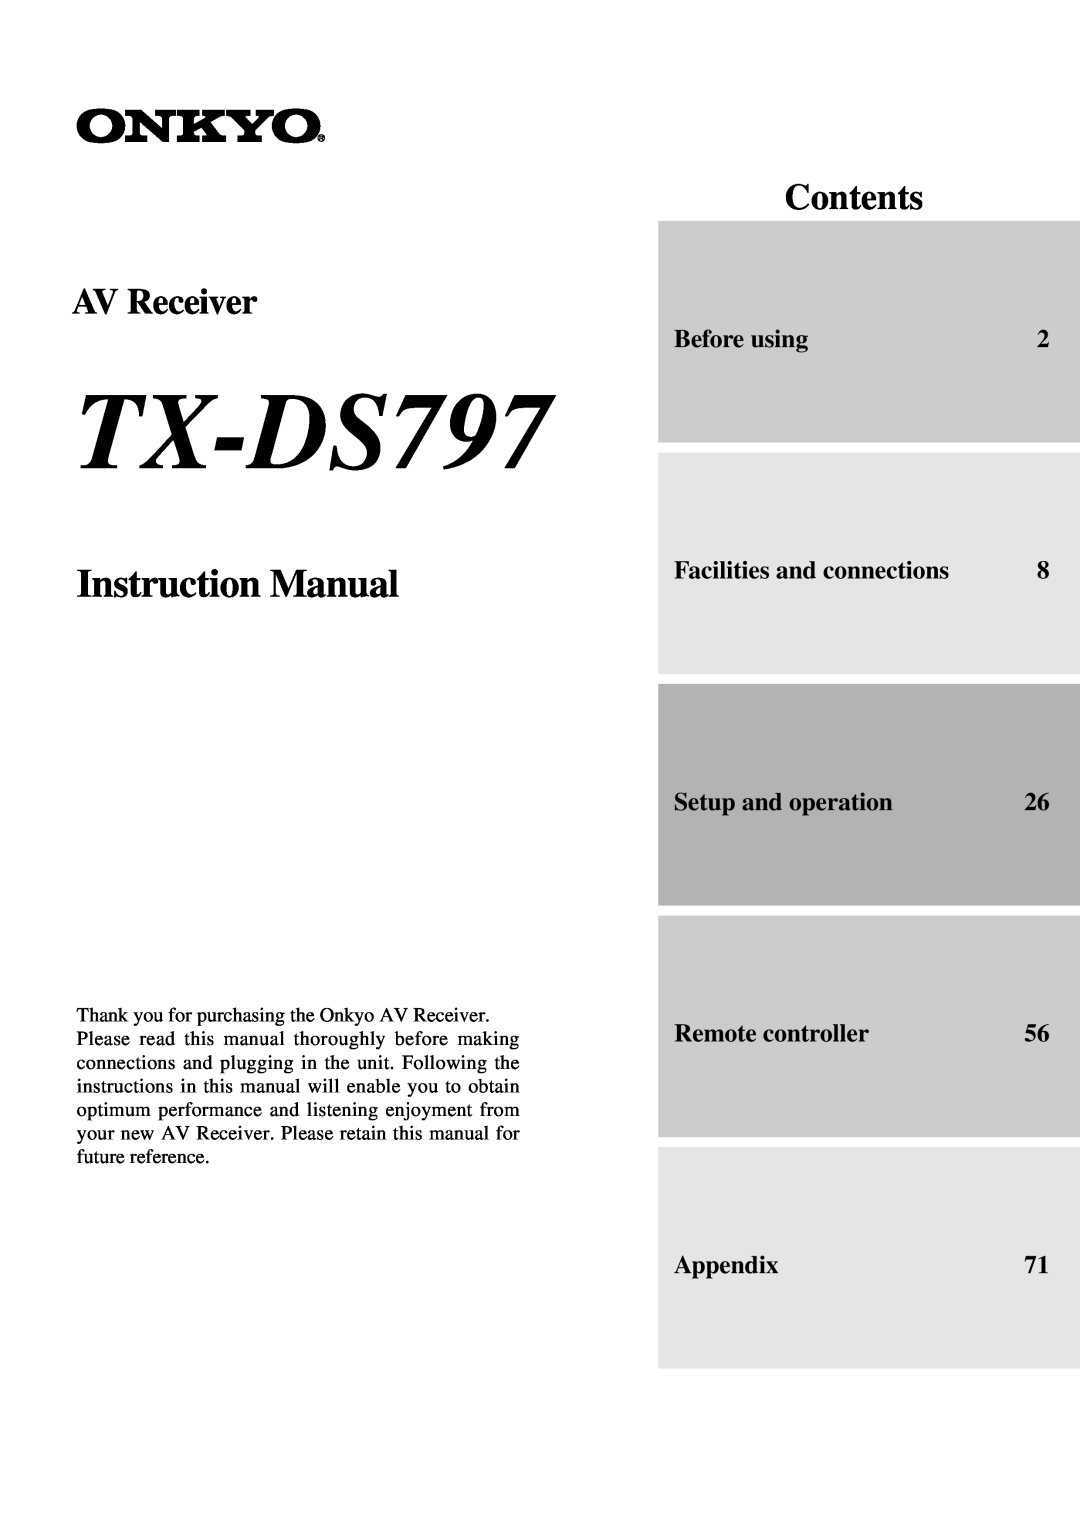 Onkyo TX-DS797 instruction manual Contents AV Receiver, Before using, Facilities and connections, Setup and operation 